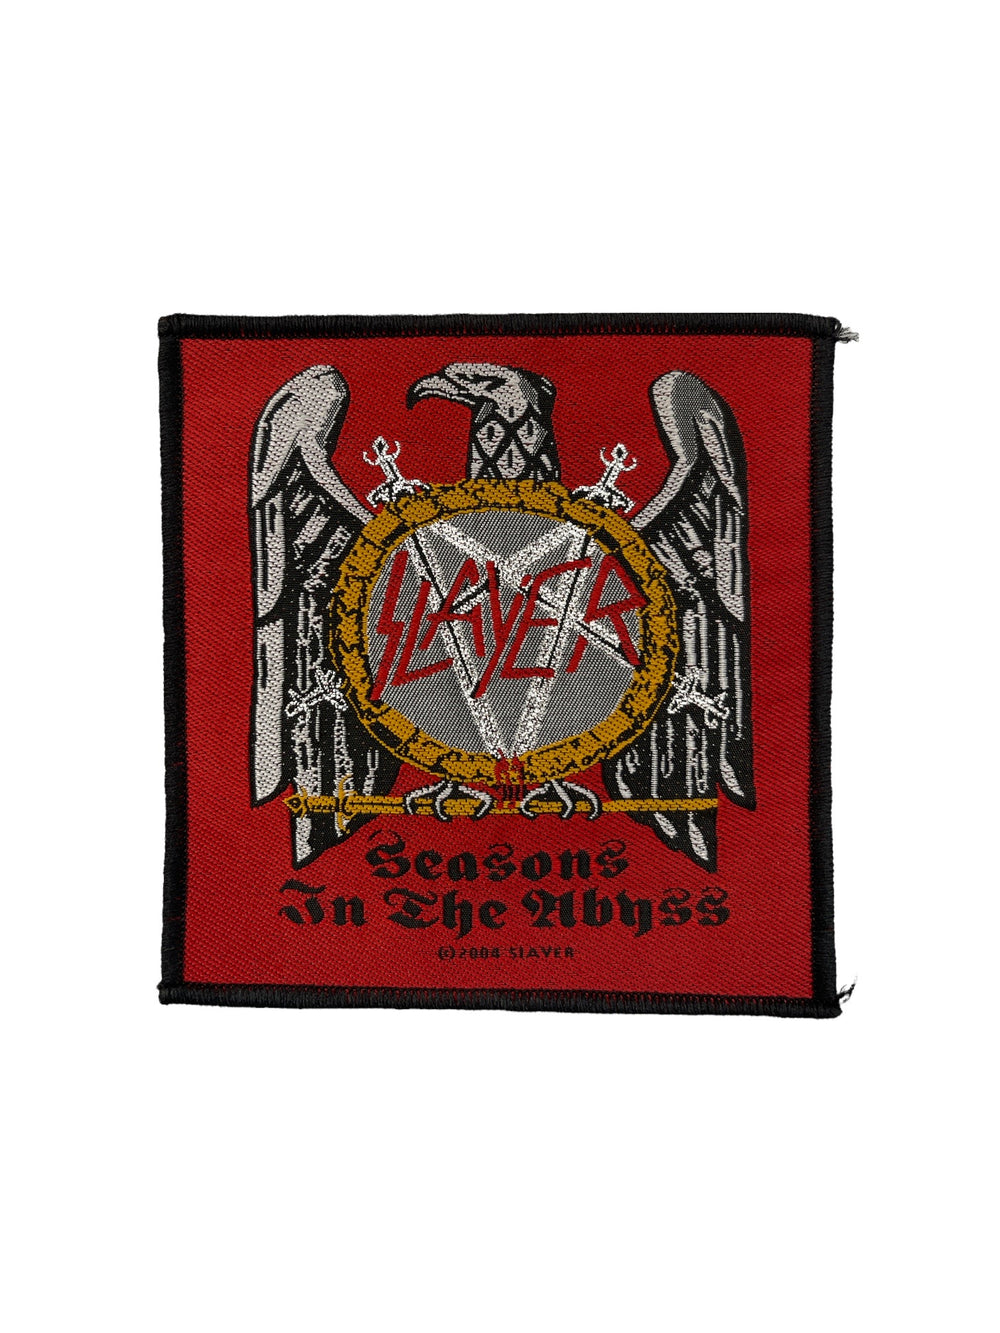 Slayer Standard Patch: Seasons In The Abyss Woven Patch Brand New